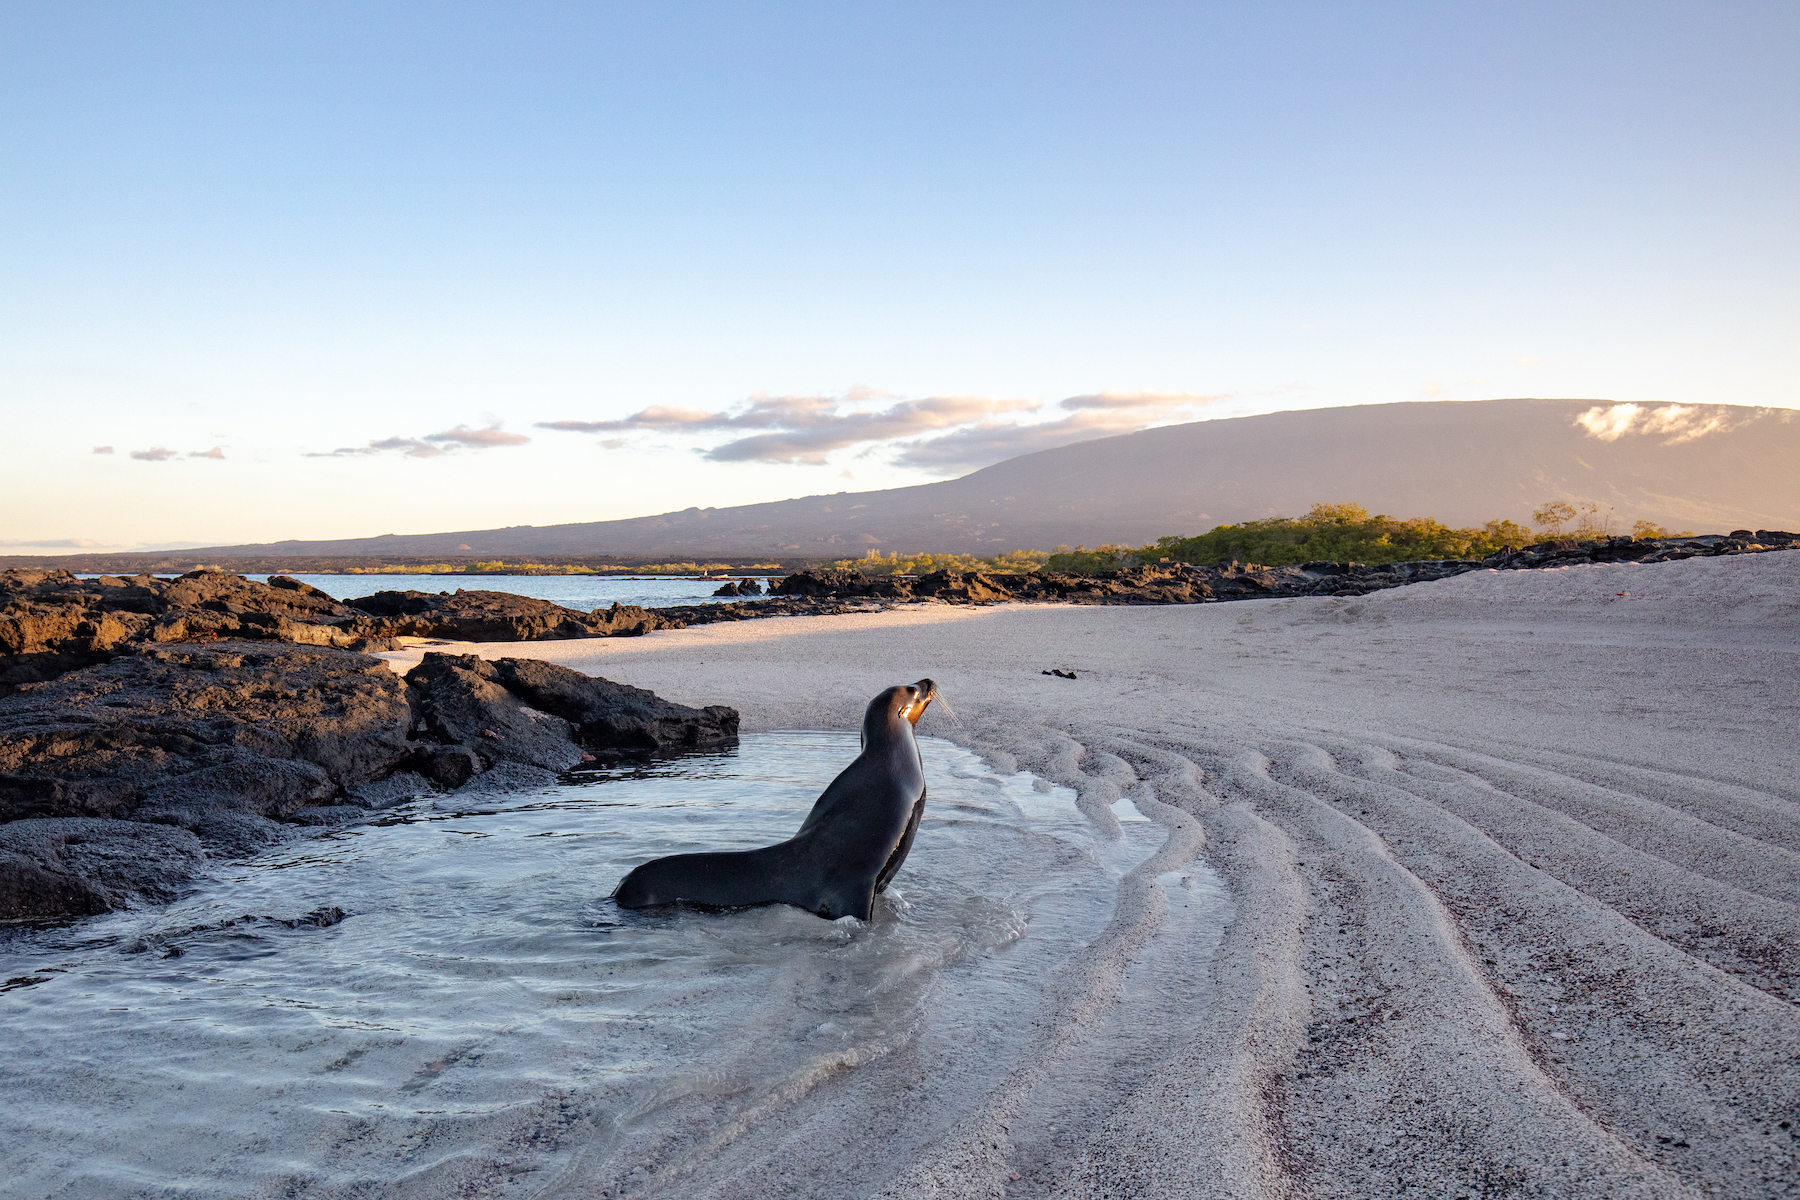 A sea lion comes ashore in the evening light (image by Inger Vandyke)